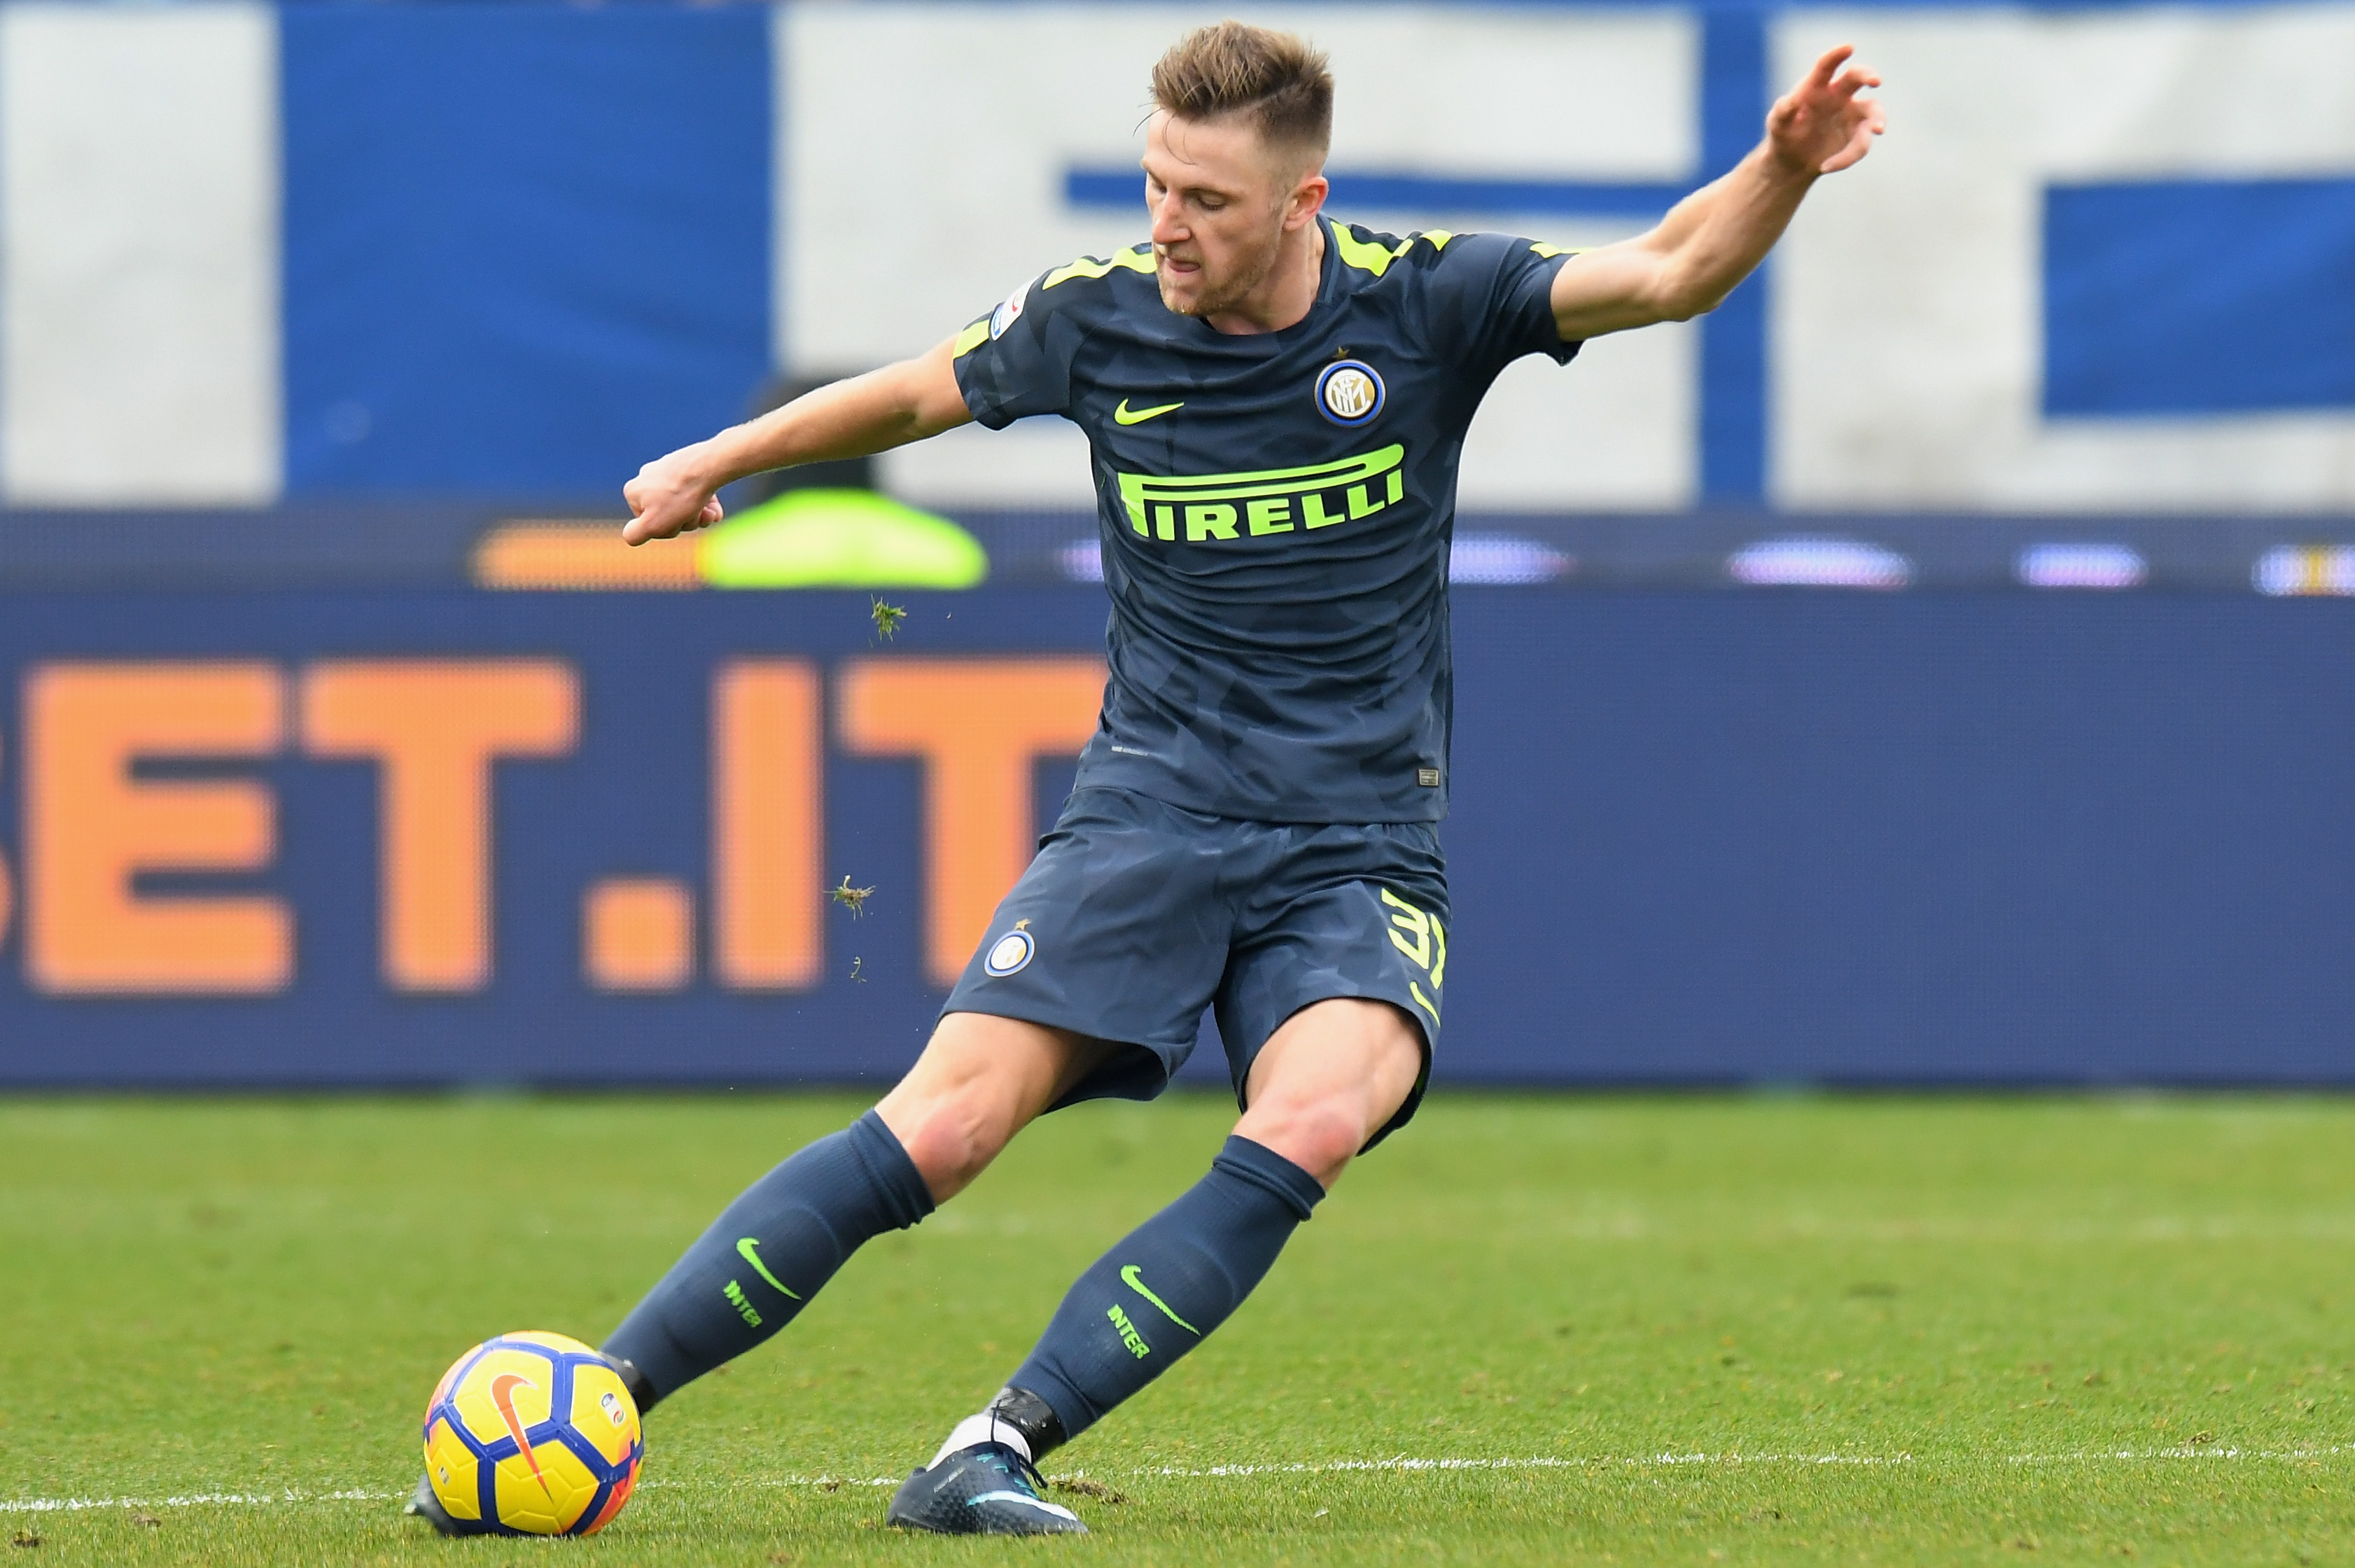 FERRARA, ITALY - JANUARY 28: Milan kriniar of FC Internazionale in action during the serie A match between Spal and FC Internazionale at Stadio Paolo Mazza on January 28, 2018 in Ferrara, Italy.  (Photo by Alessandro Sabattini/Getty Images)